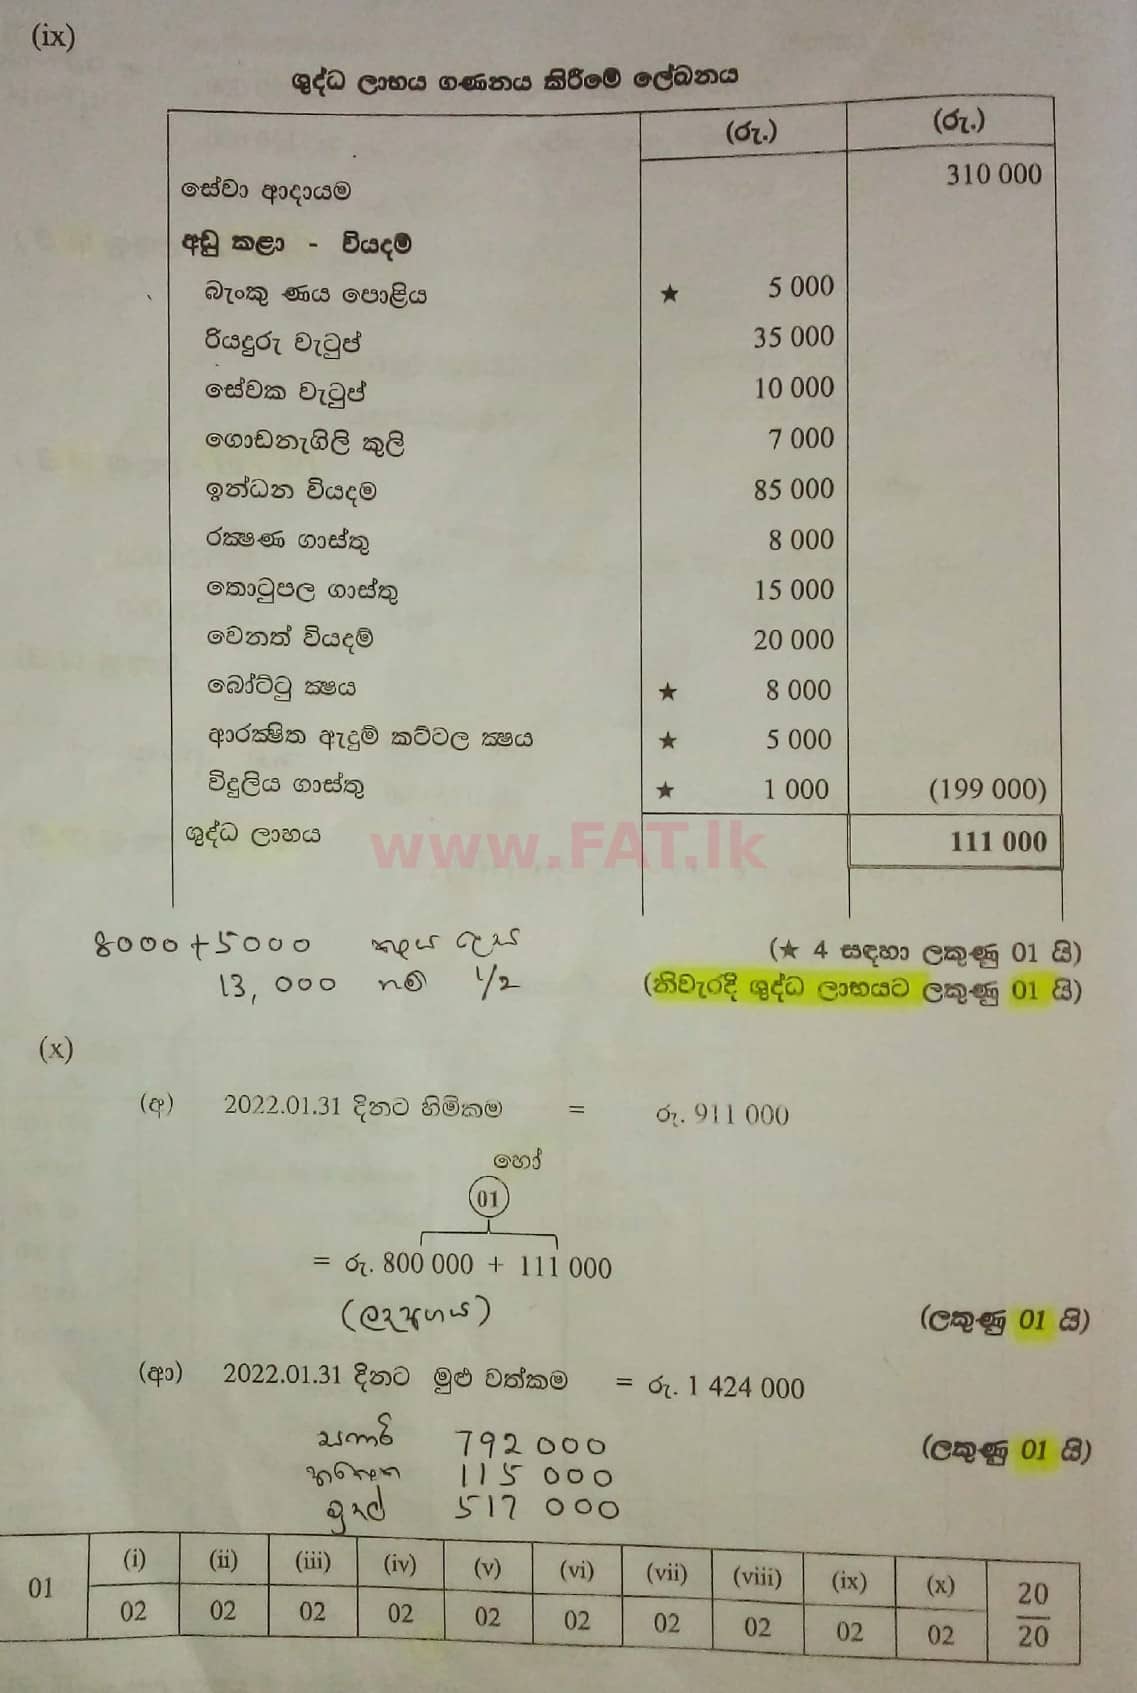 National Syllabus : Ordinary Level (O/L) Business and Accounting Studies - 2021 May - Paper II (සිංහල Medium) 1 5813